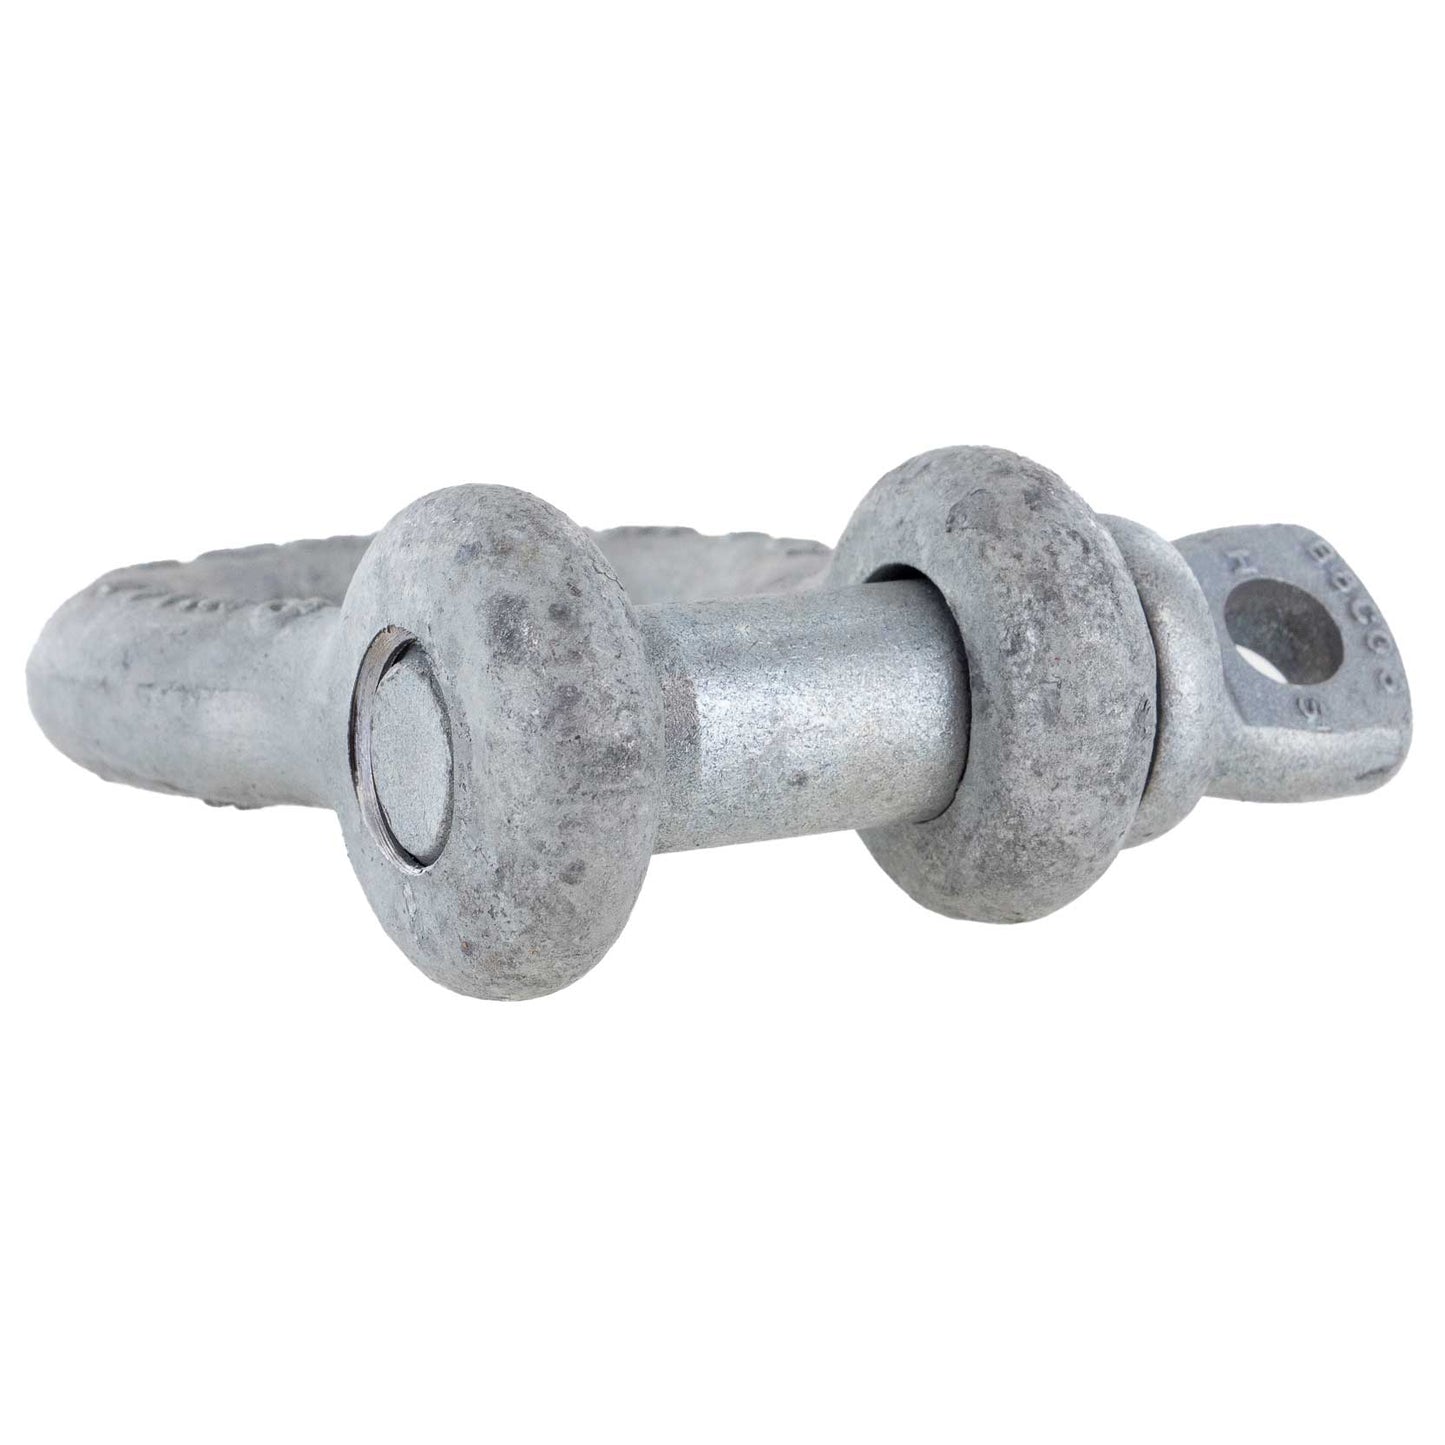 7/8" Crosby® Alloy Screw Pin Anchor Shackle | G-209A - 9.5 Ton side view